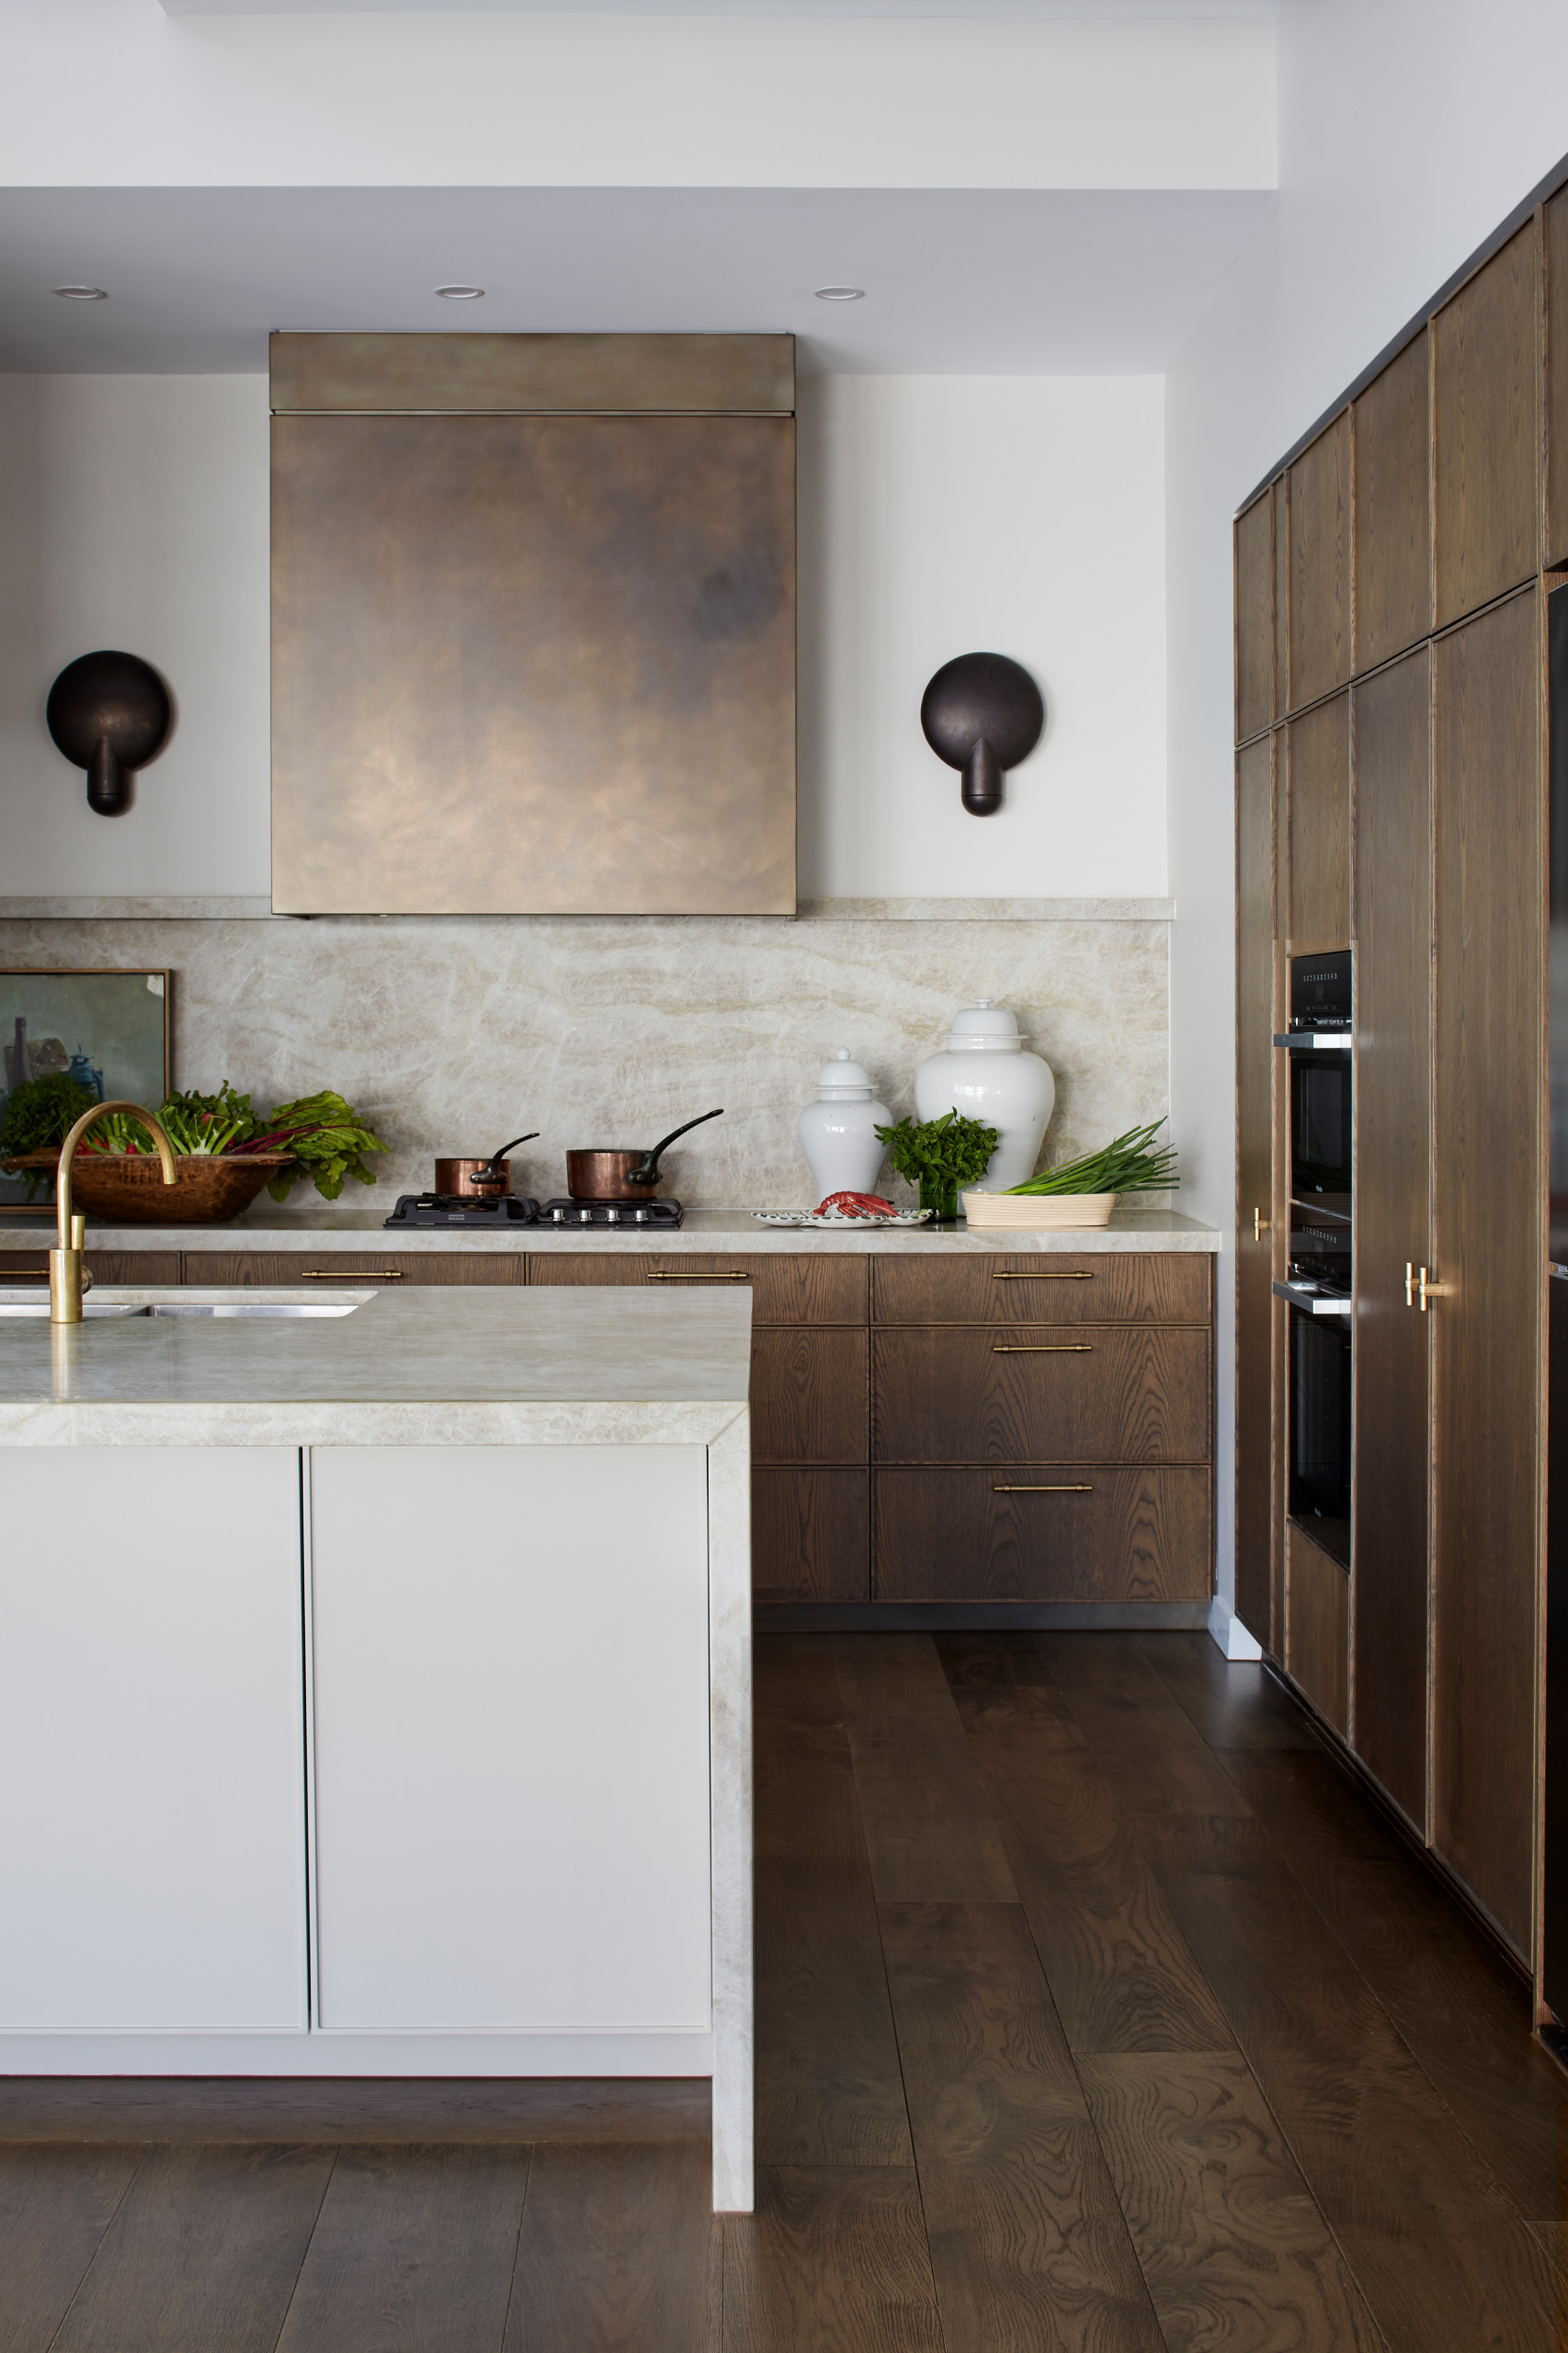 Sand Is the New Neutral Kitchen Cabinet Color Alternative to White and  Gray